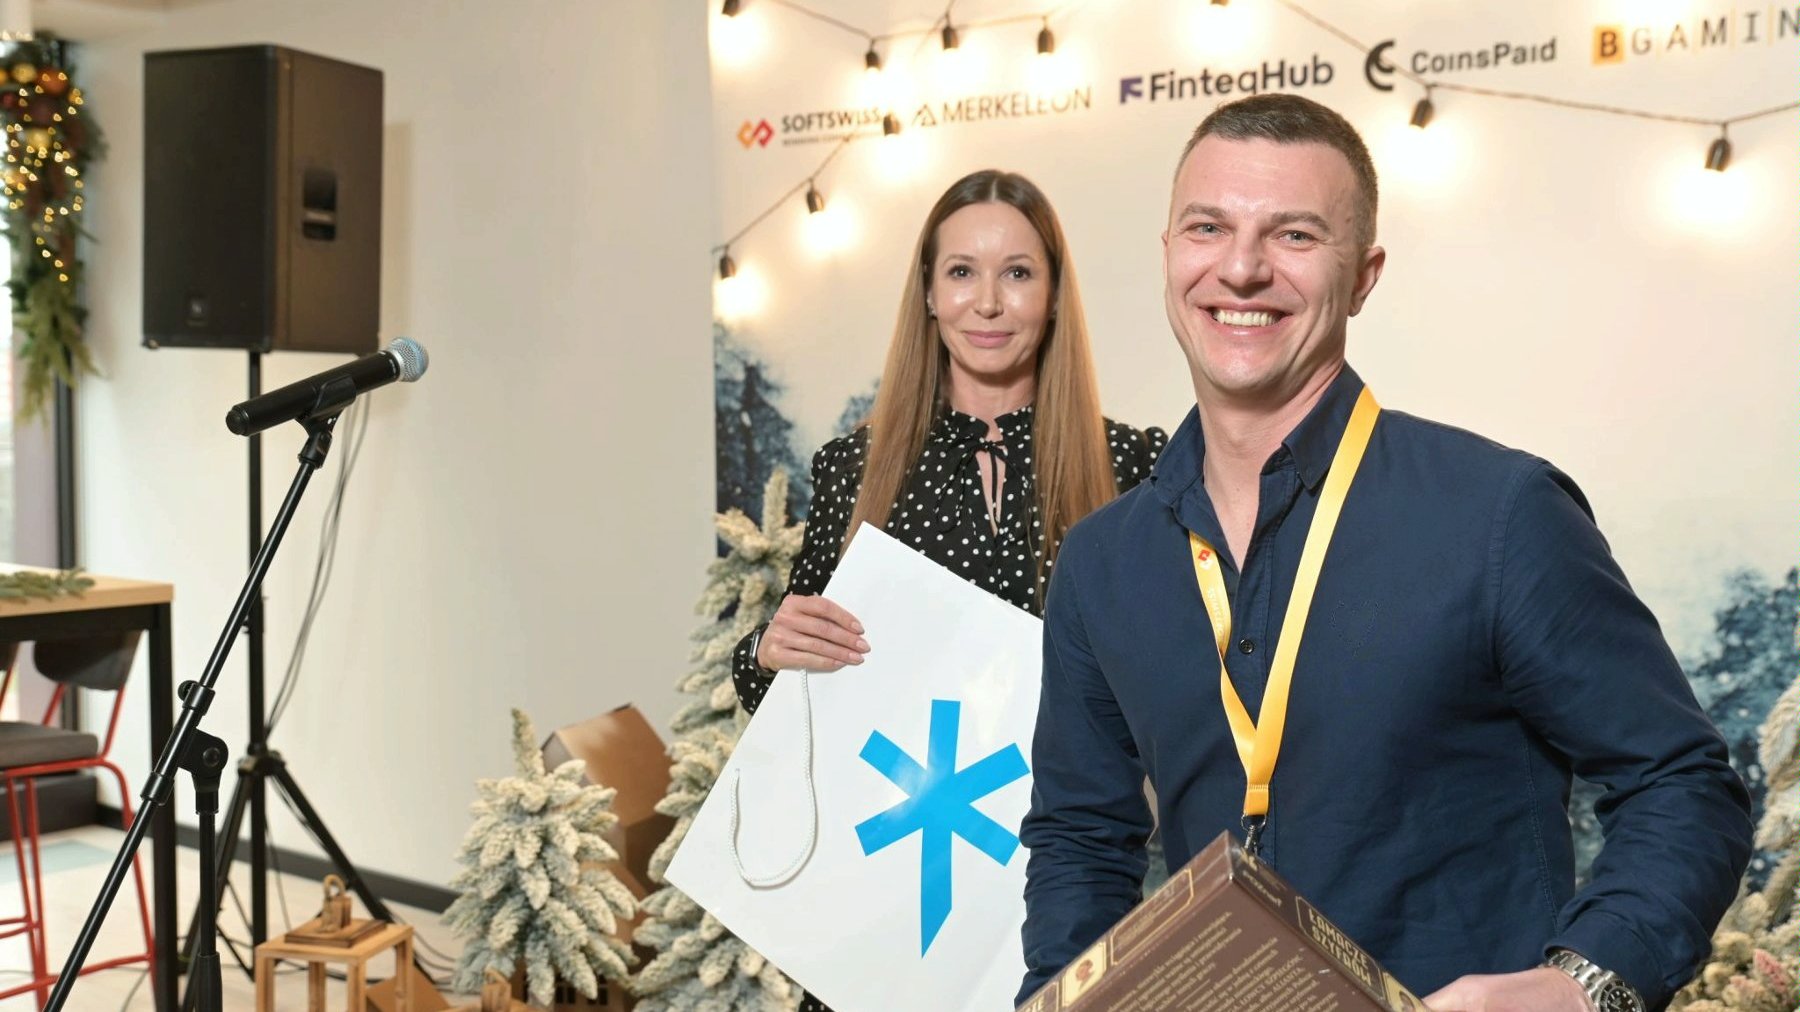 The photo shows Ivan Montik, founder of SOFTSWISS. The man is smiling, holding the board game Code Breakers. Behind him is the director of the Investor Relations Department, Katja Lozina. In the background is a festive wall with company logos.